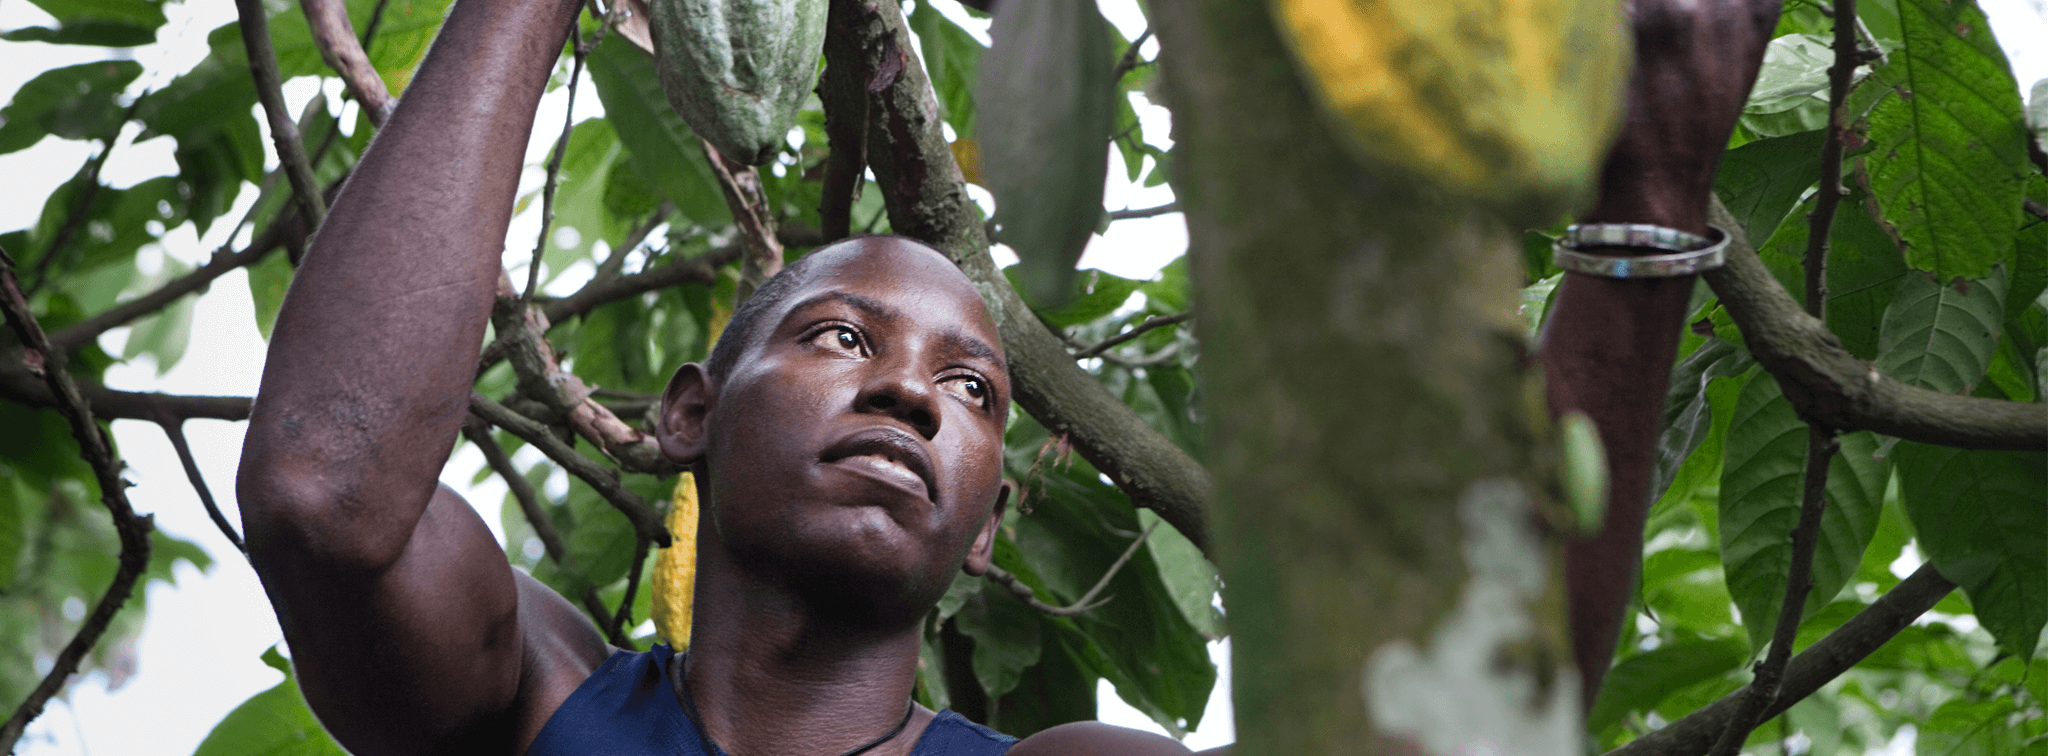 You are currently viewing ‘A blow to farmers’: Fairtrade responds to fall in cocoa purchase prices in Côte d’Ivoire